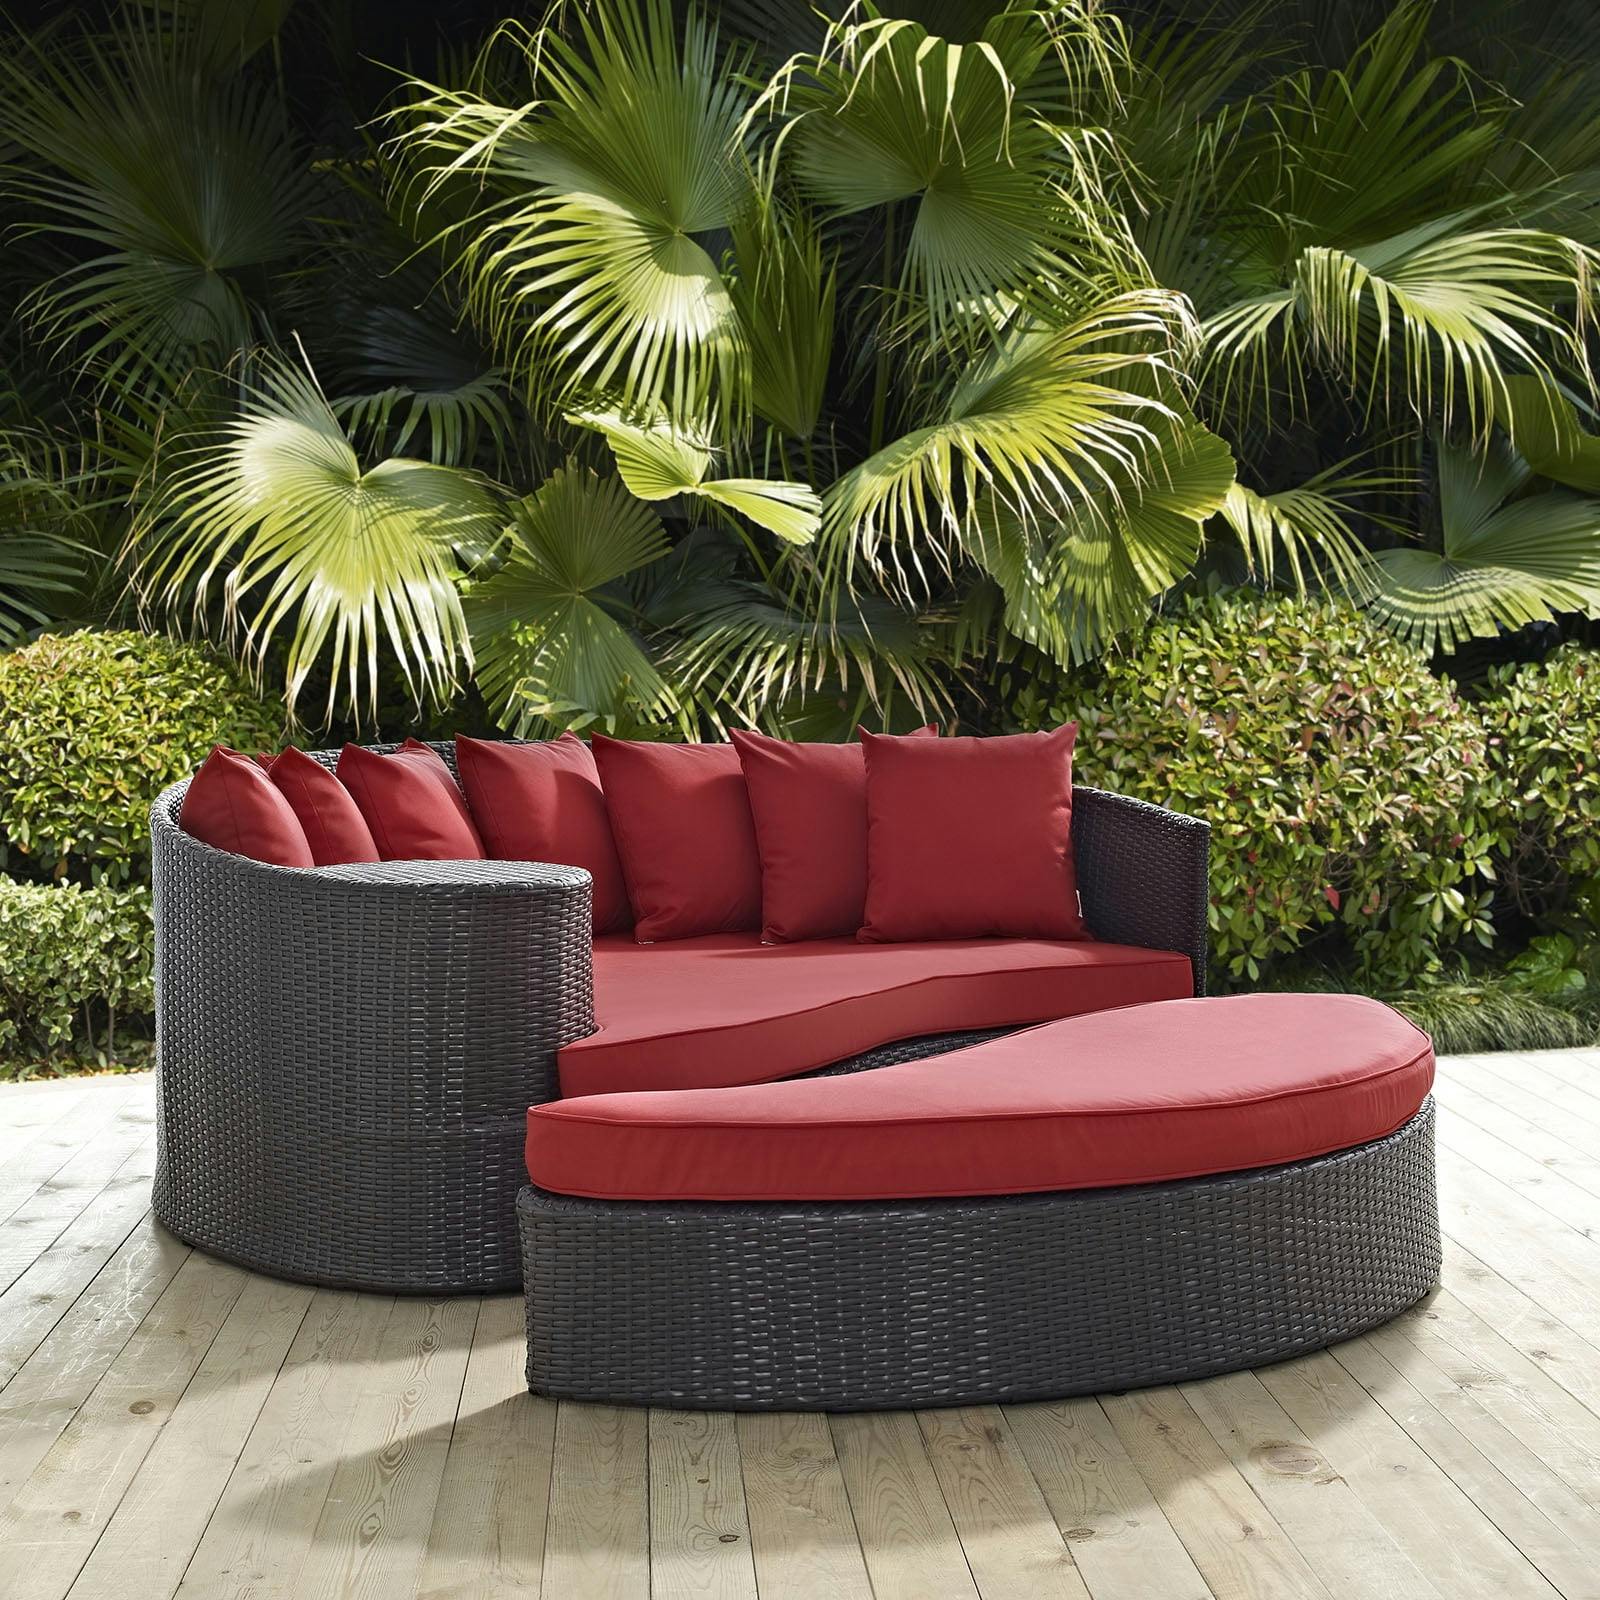 Espresso Red Rattan Weave Outdoor Patio Daybed with Cushions